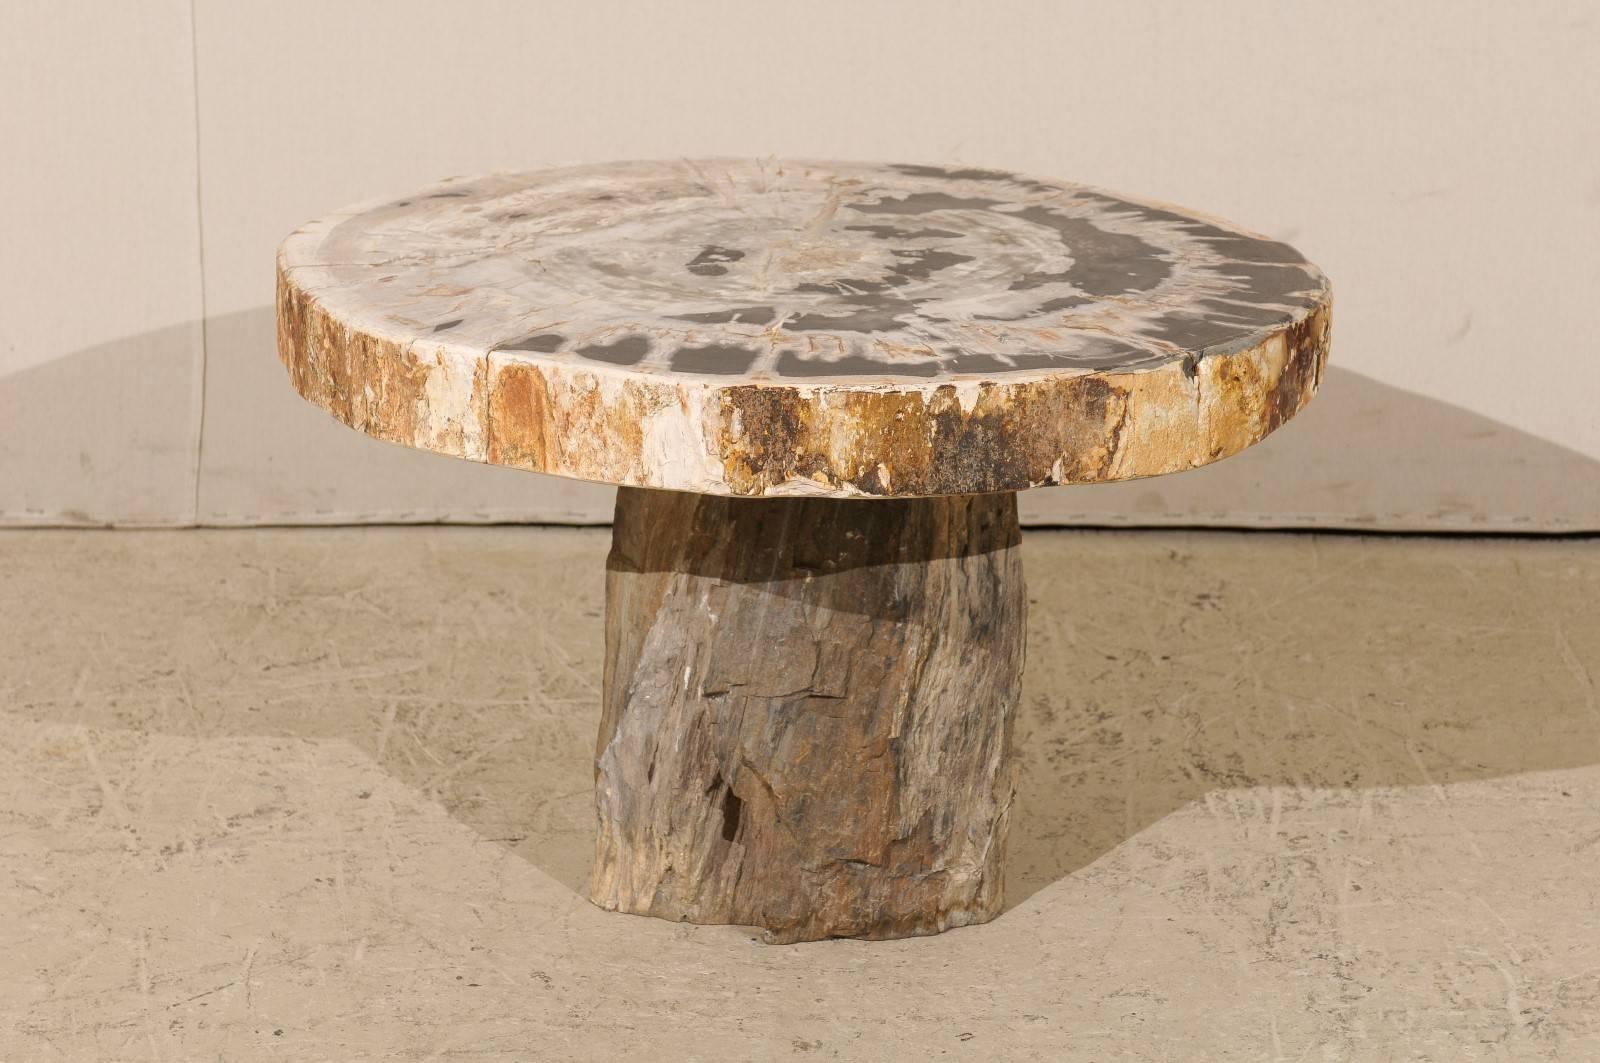 A petrified wood coffee table. This petrified wood coffee table features a round shaped top over a pedestal style base. The two-toned top mixes beige and black tones. The top simply sits on the base. The table is very heavy as petrified wood is a